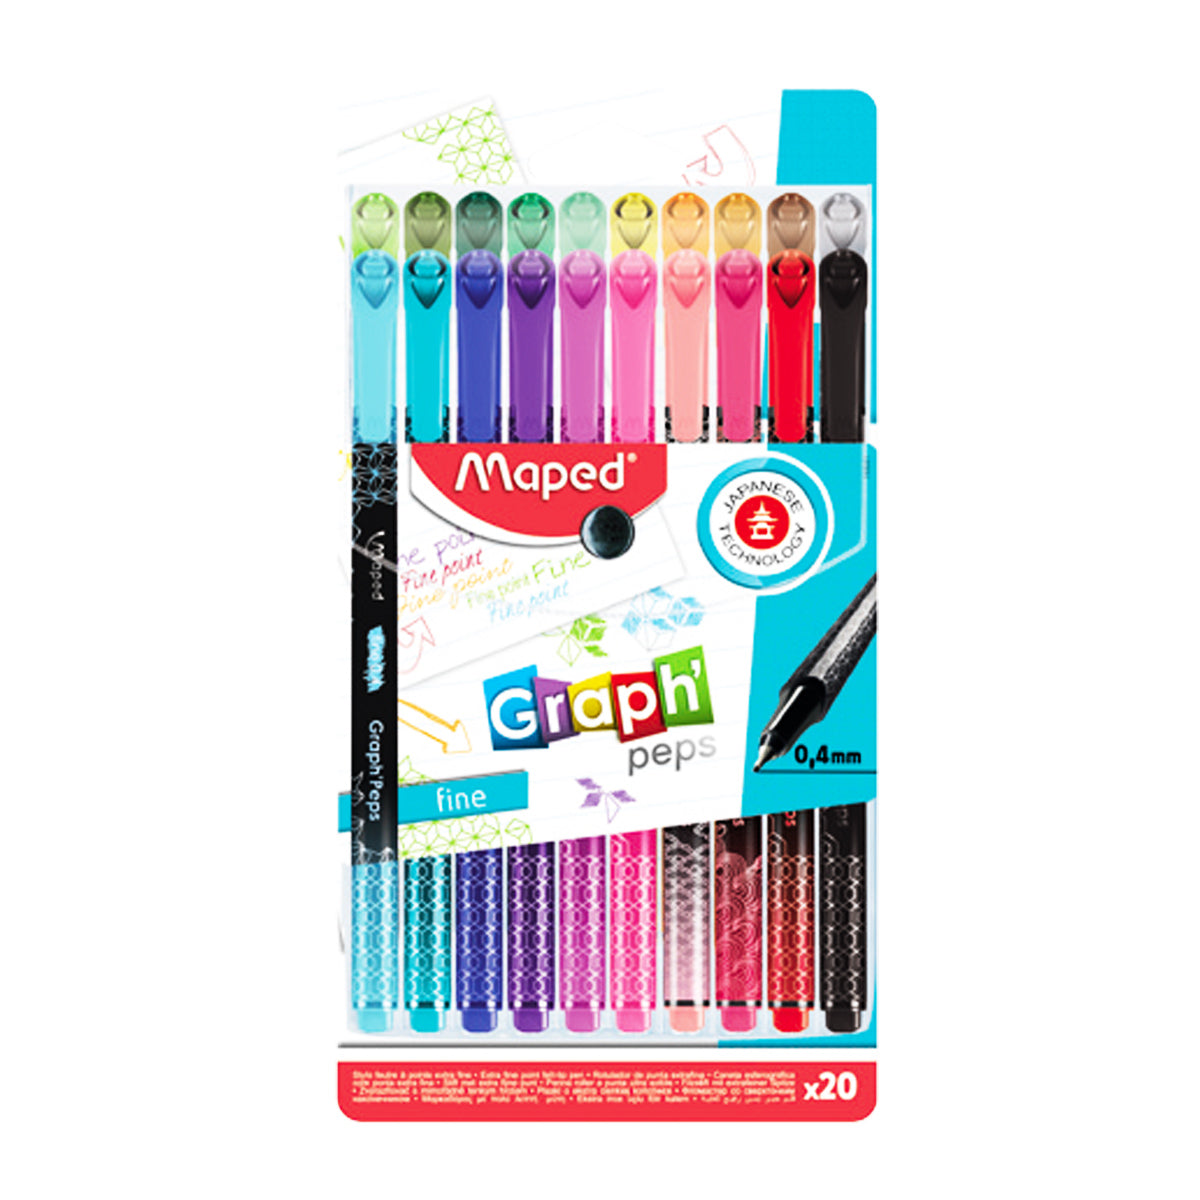 Maped Graph'Peps Deco -20 Bright Assorted Color Fine Tip Pens